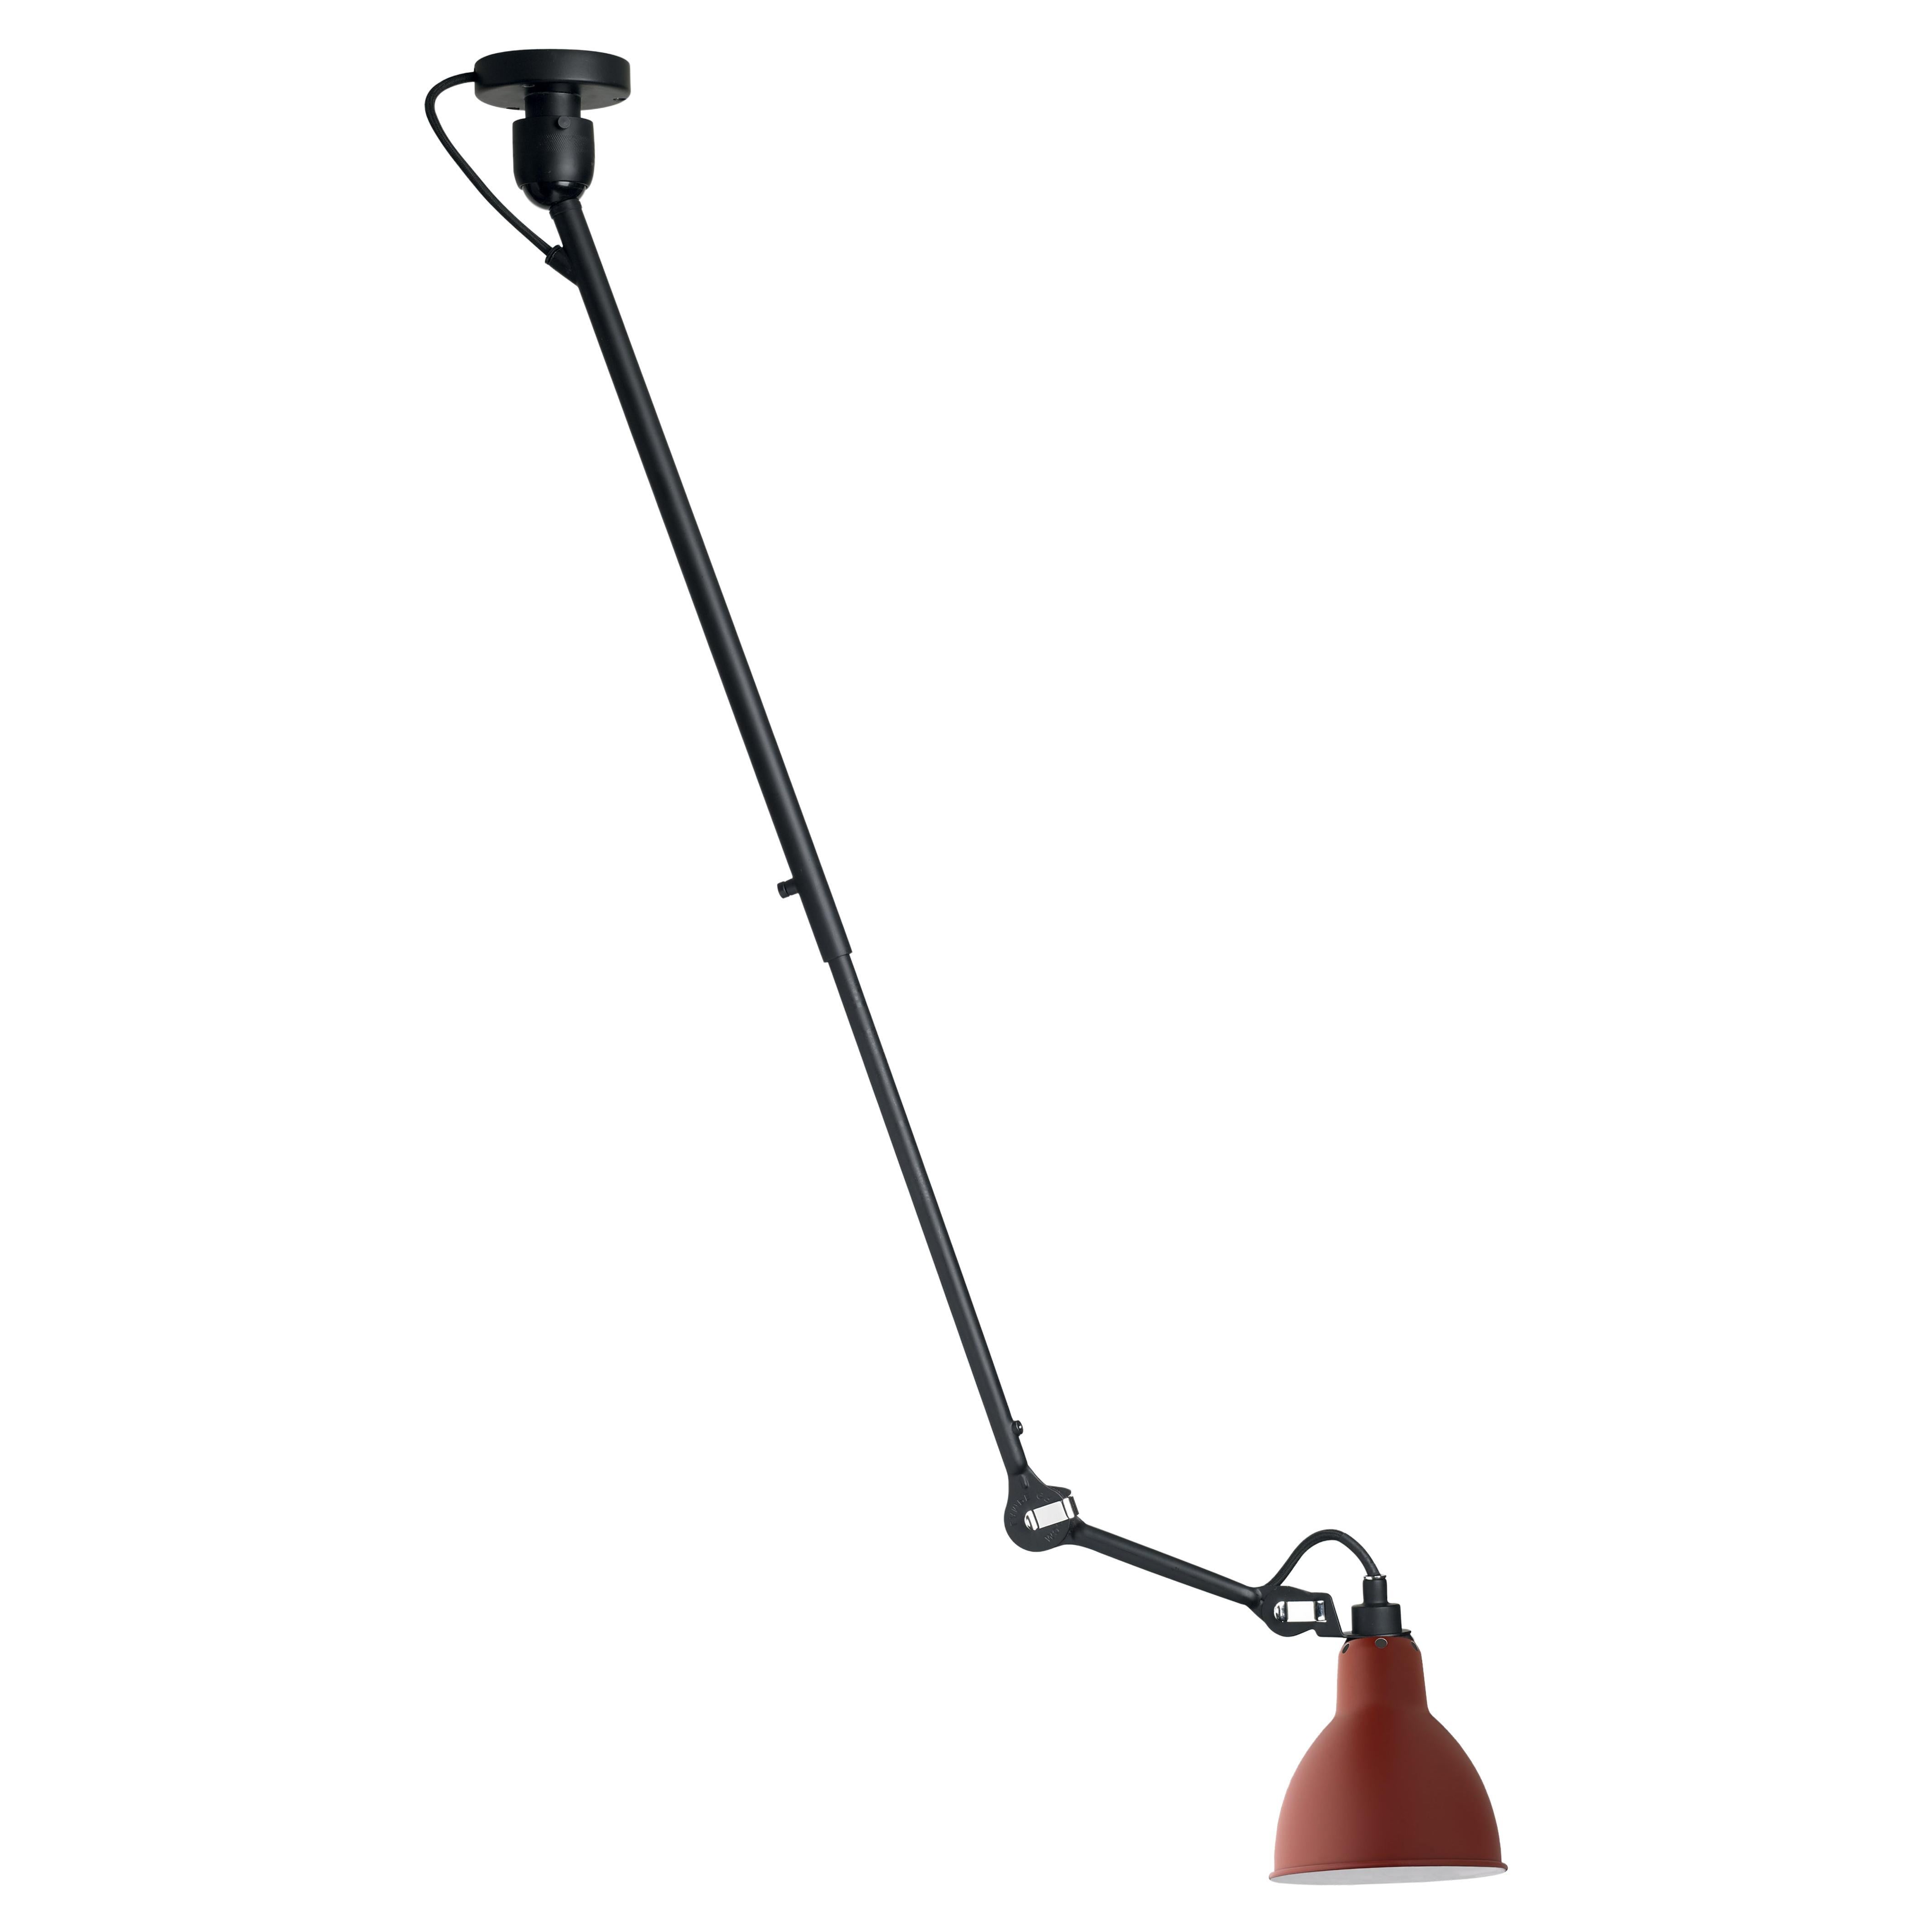 DCW Editions La Lampe Gras N°302 Pendant Light in Black Arm and Red Shade